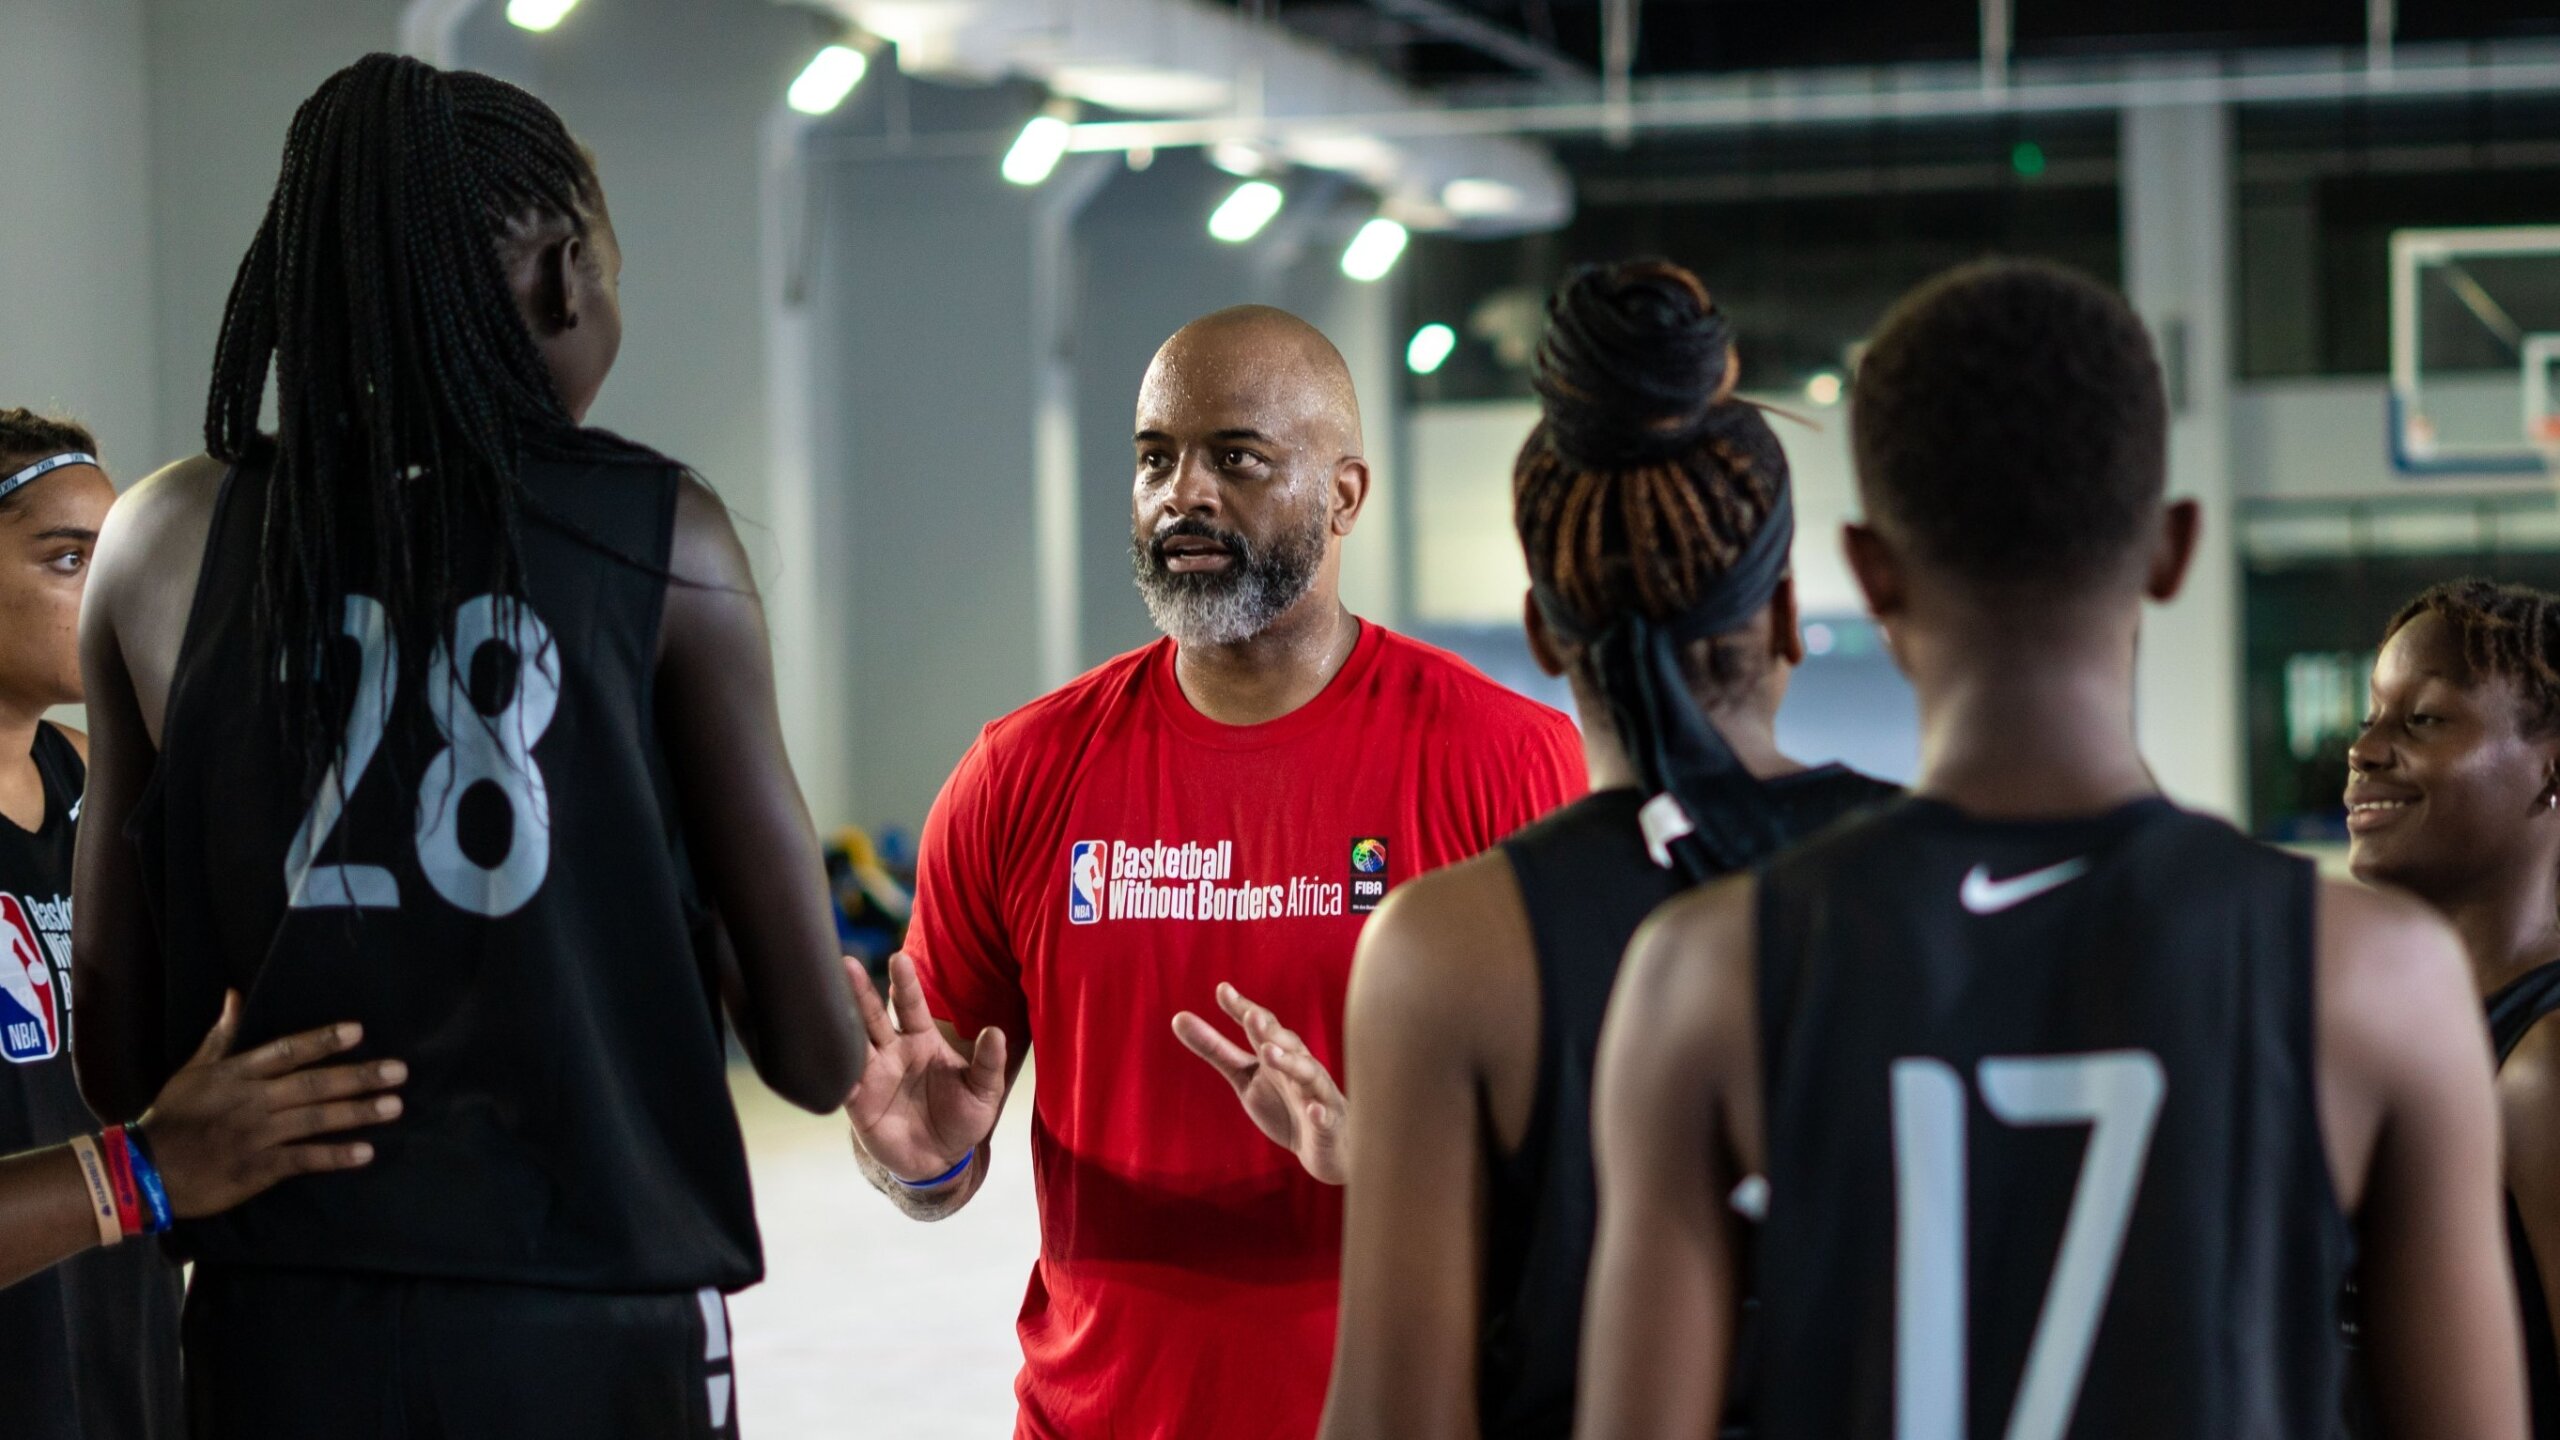 Photos: Wes Unseld Jr.'s first day in D.C. Photo Gallery